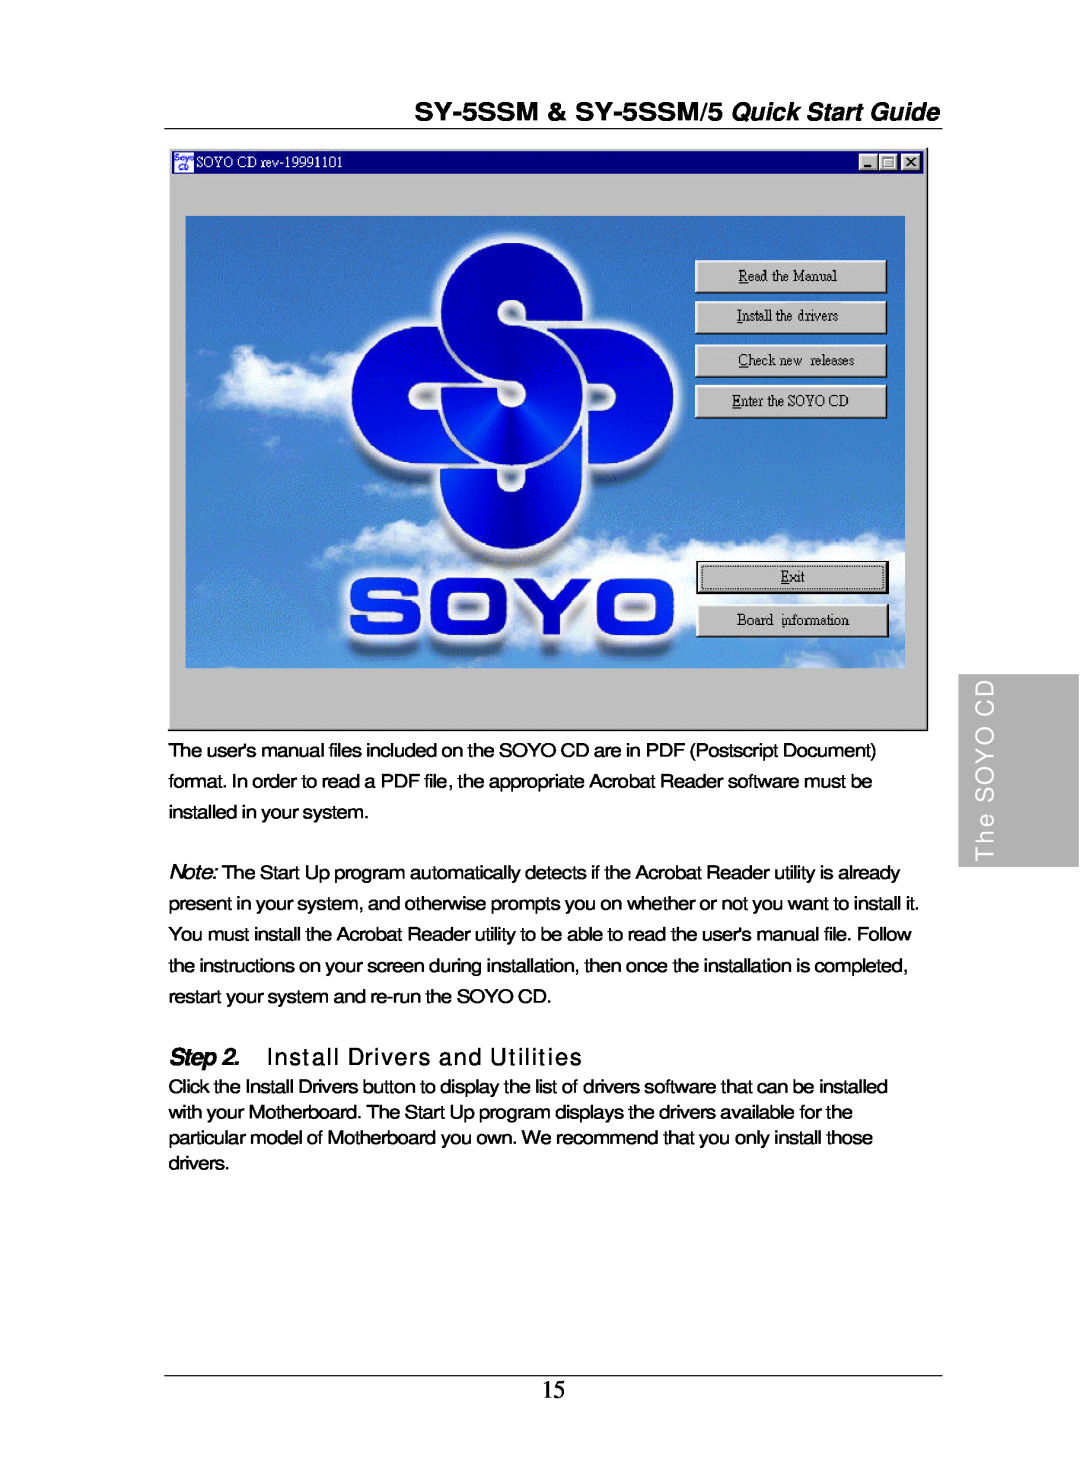 SOYO quick start Install Drivers and Utilities, SY-5SSM & SY-5SSM/5 Quick Start Guide 